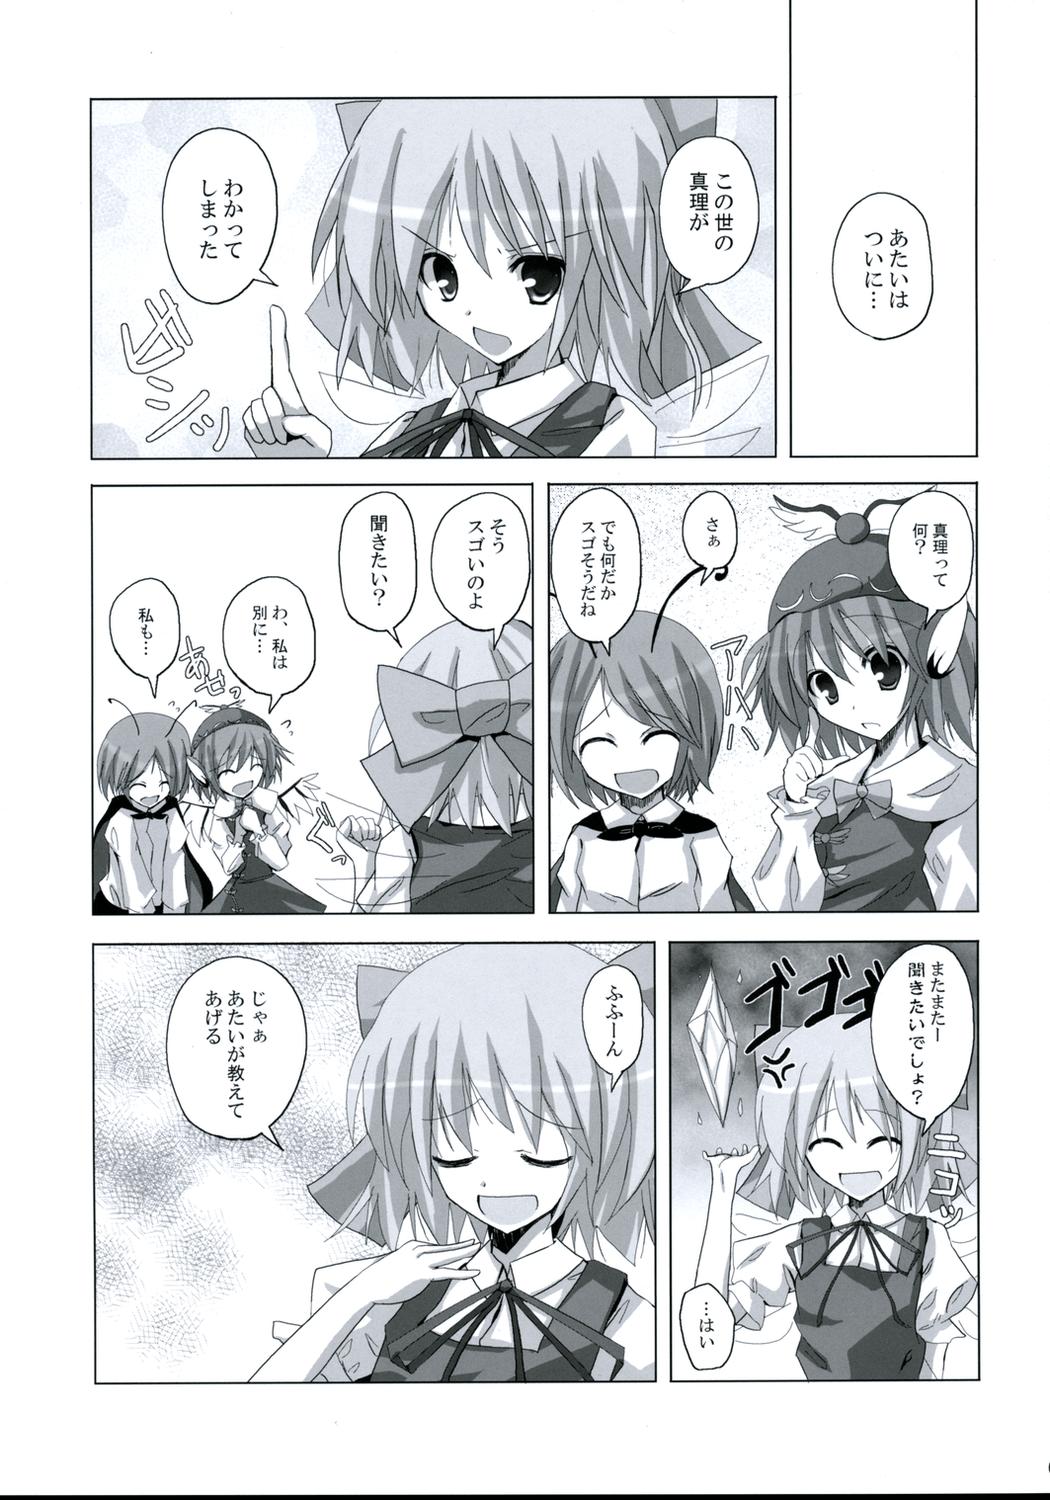 Arabic Gensou Kitan 9 - Touhou project Old And Young - Page 4